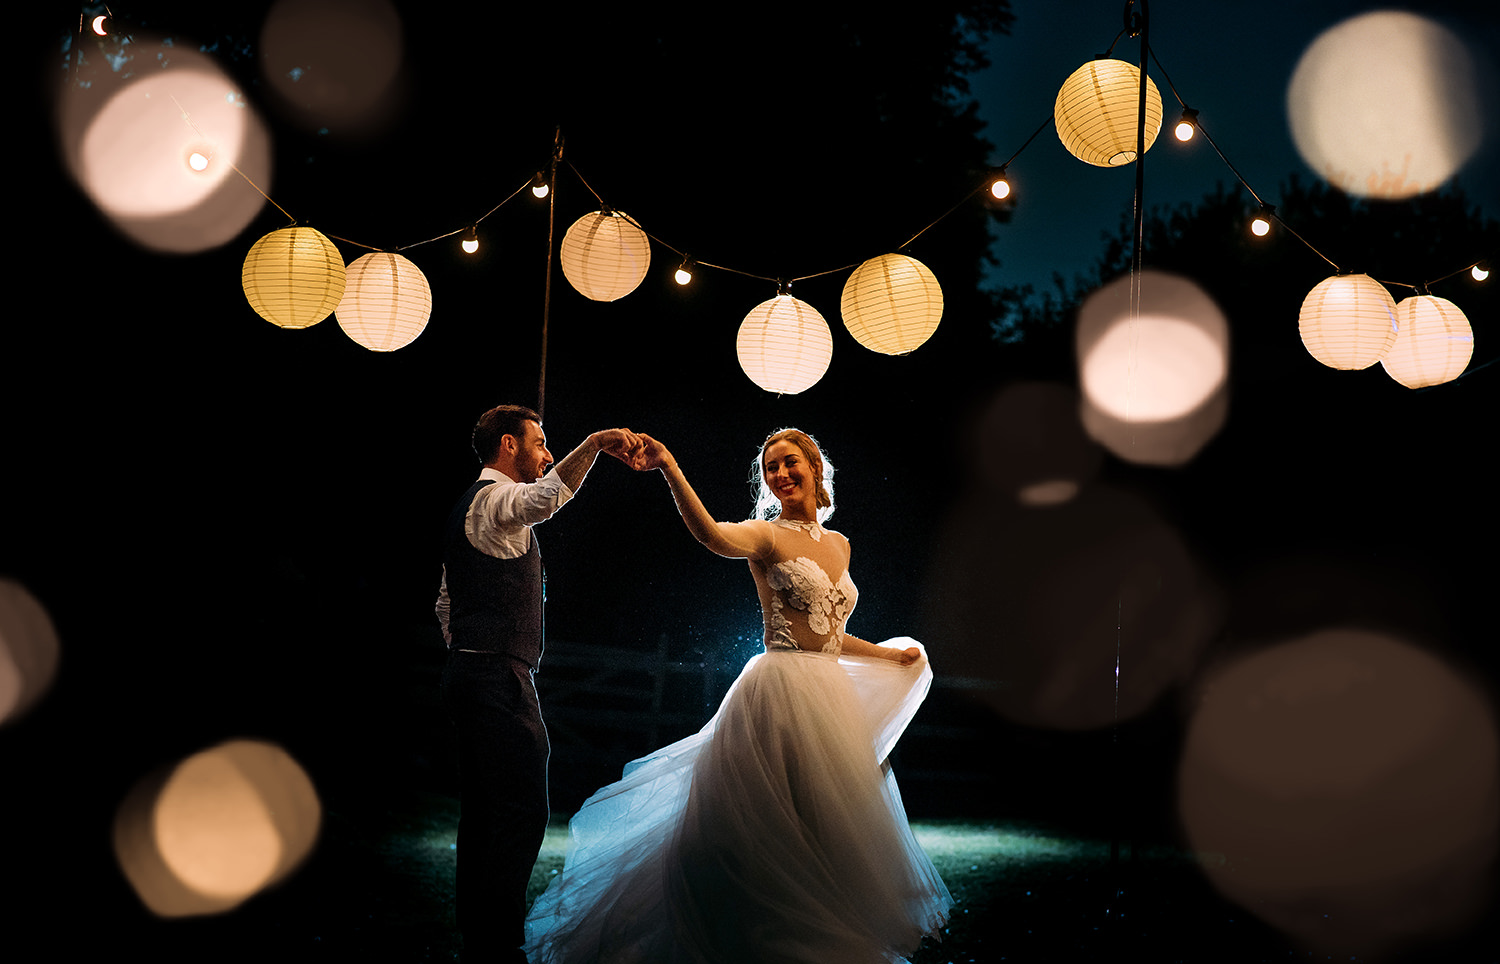  night time image of the bride and groom dancing under lanterns 